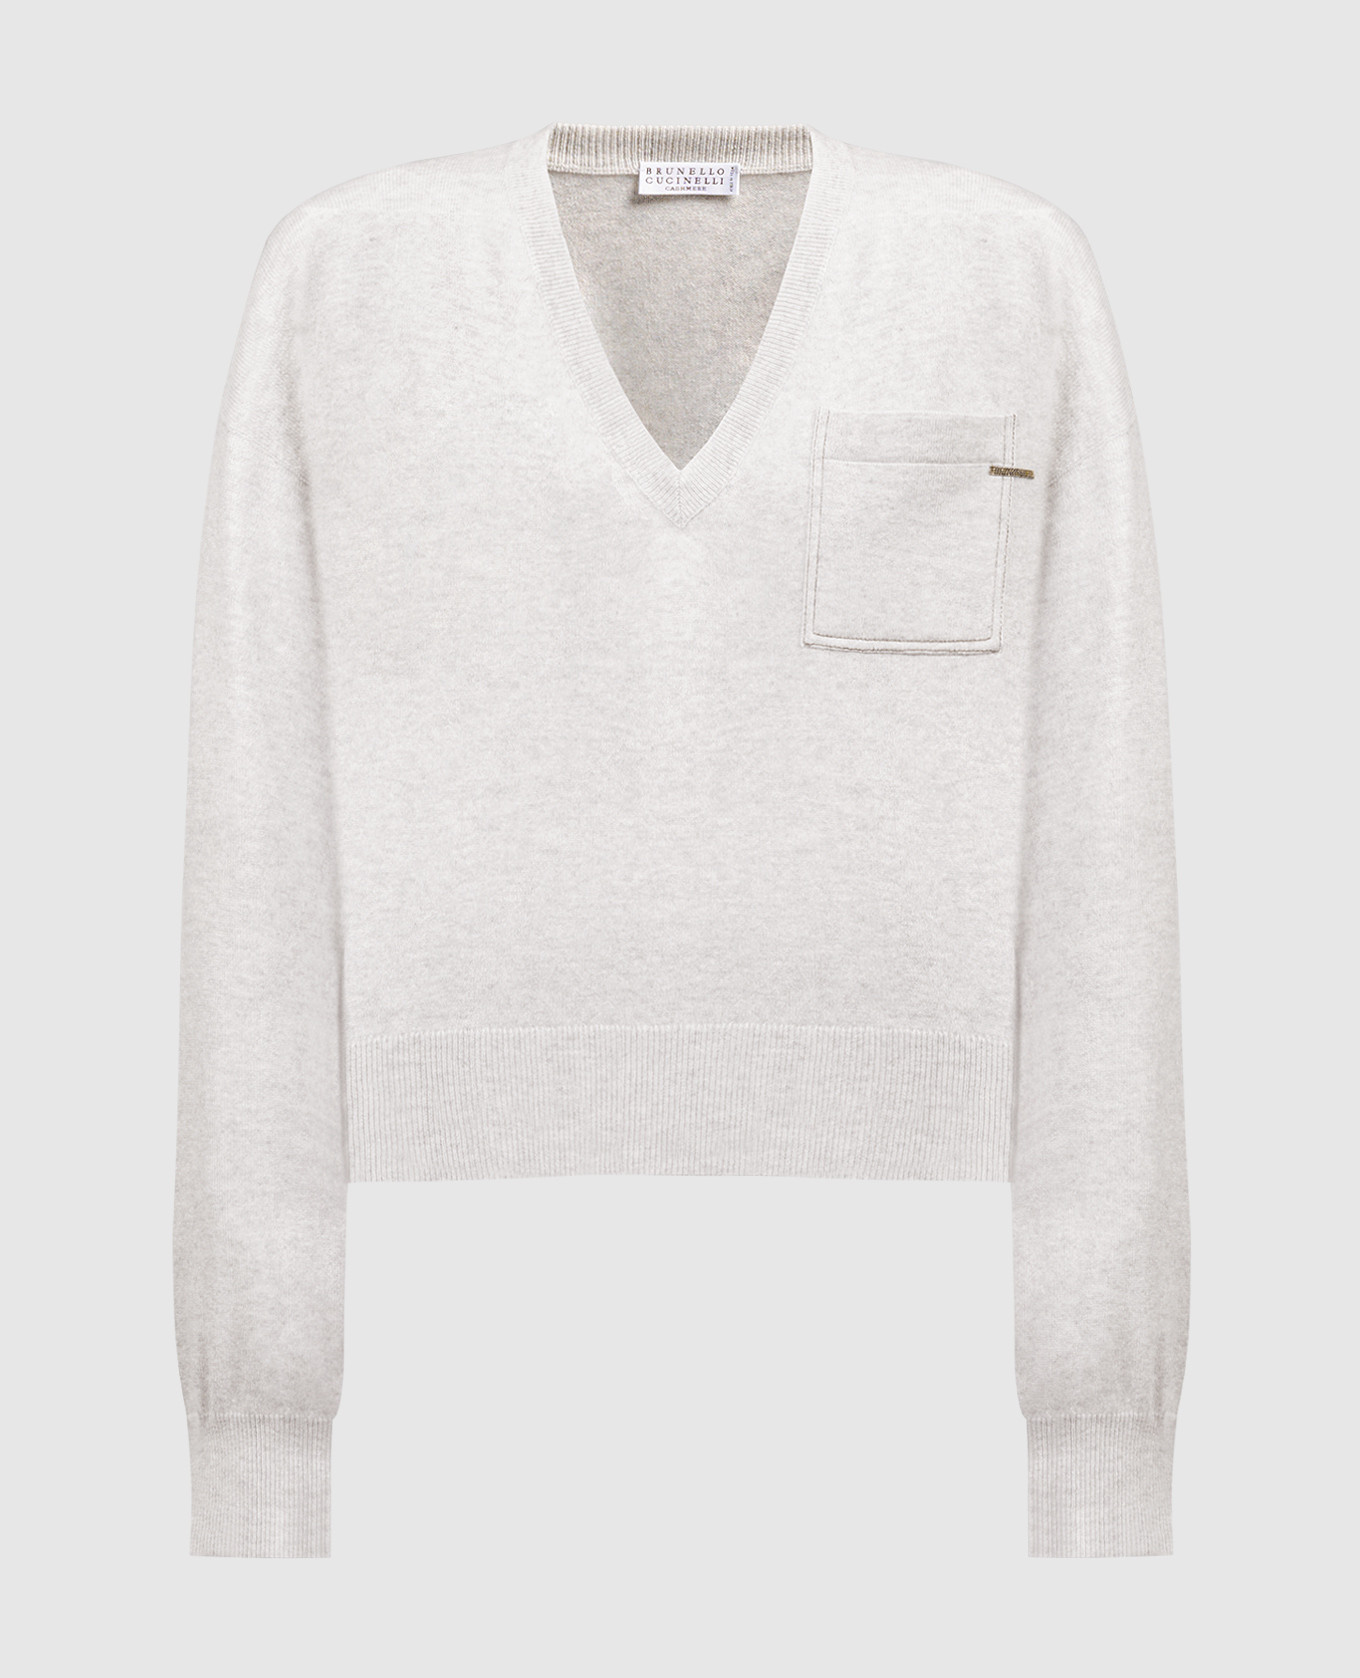 Gray cashmere pullover with monil chain